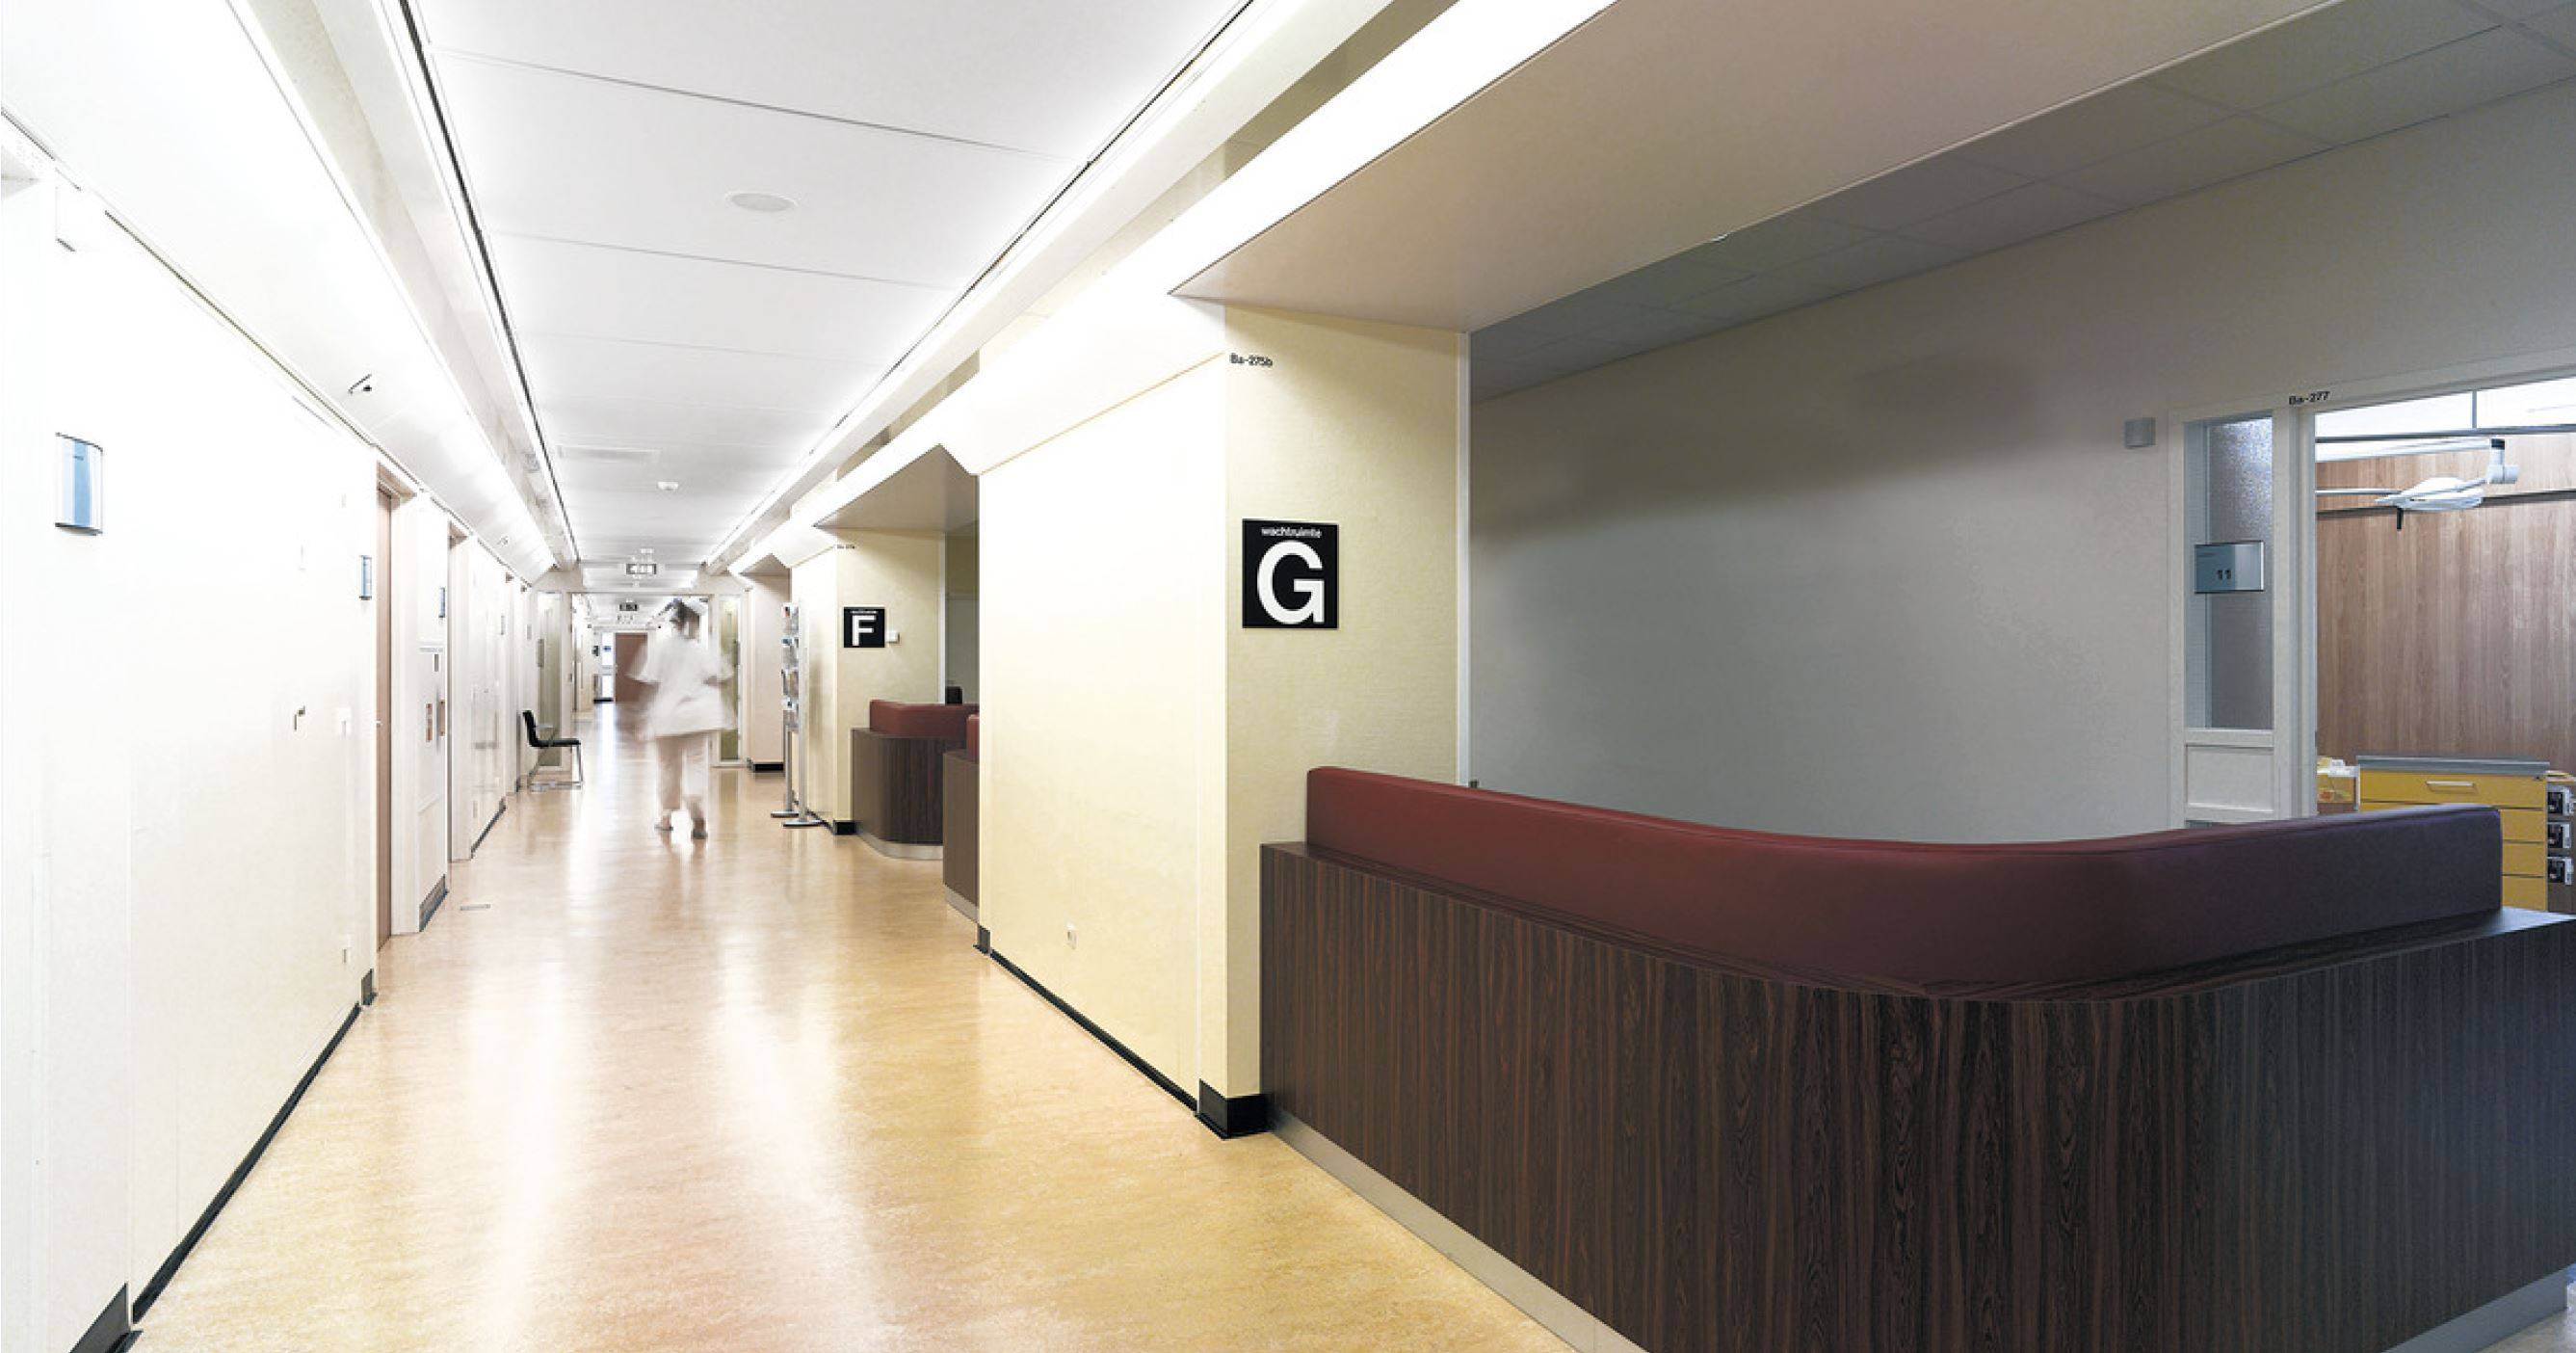 Access A or C - Ceiling Tile